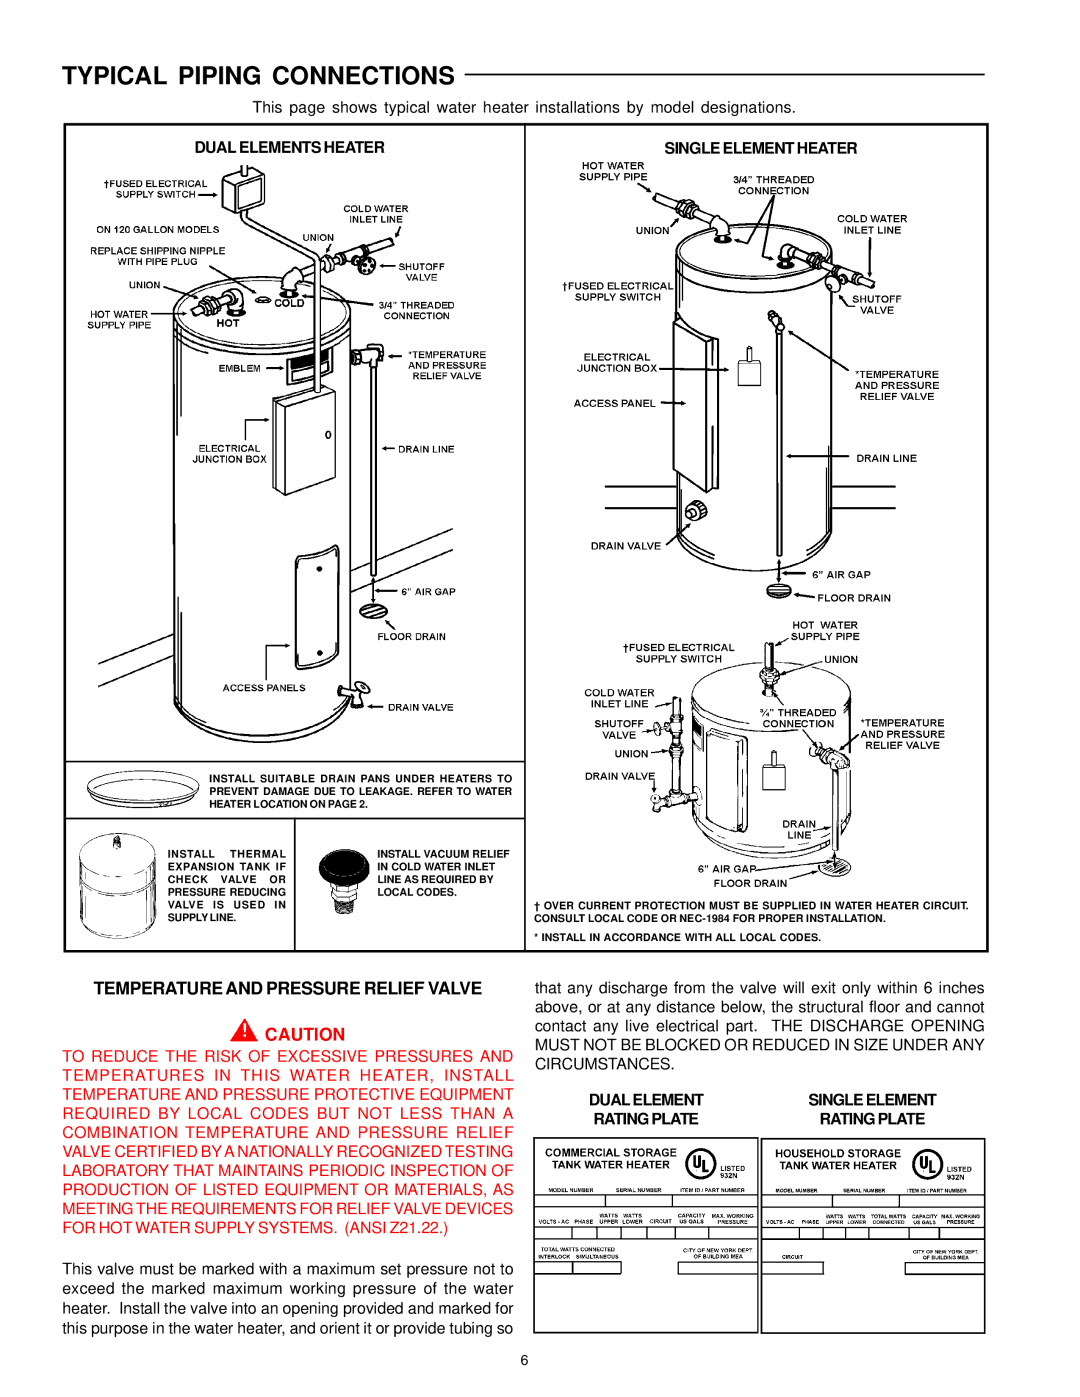 A.O. Smith del and del warranty Typical Piping Connections, Temperature and Pressure Relief Valve 